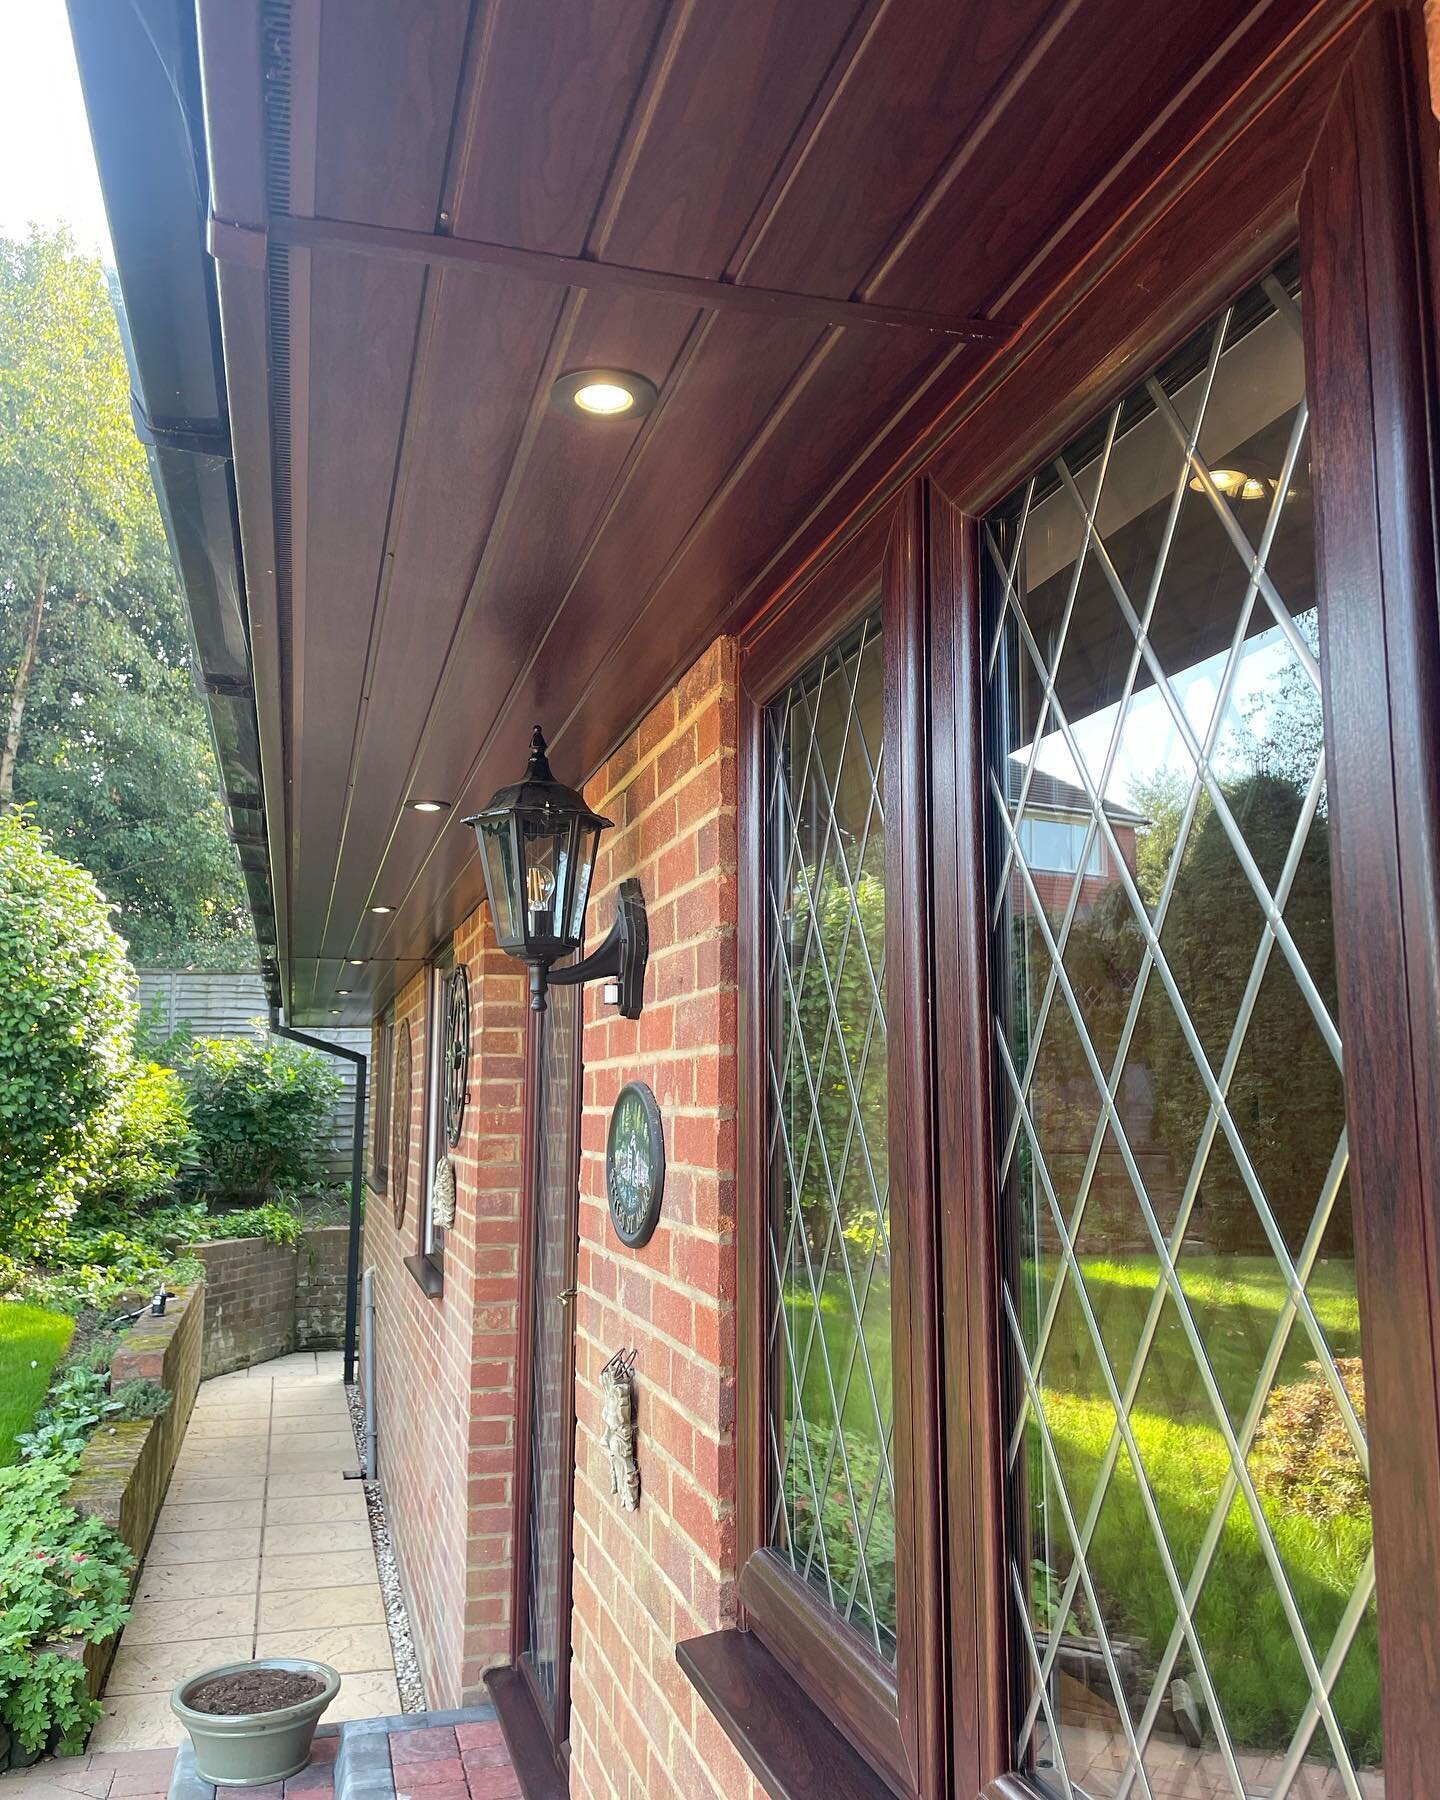 Some nice external lighting installed for a local customer. @collingwoodled h2 pro extremes for the soffits. No damage no mess. All controlled via switch and phone app for remote control and timer function. 💡✅